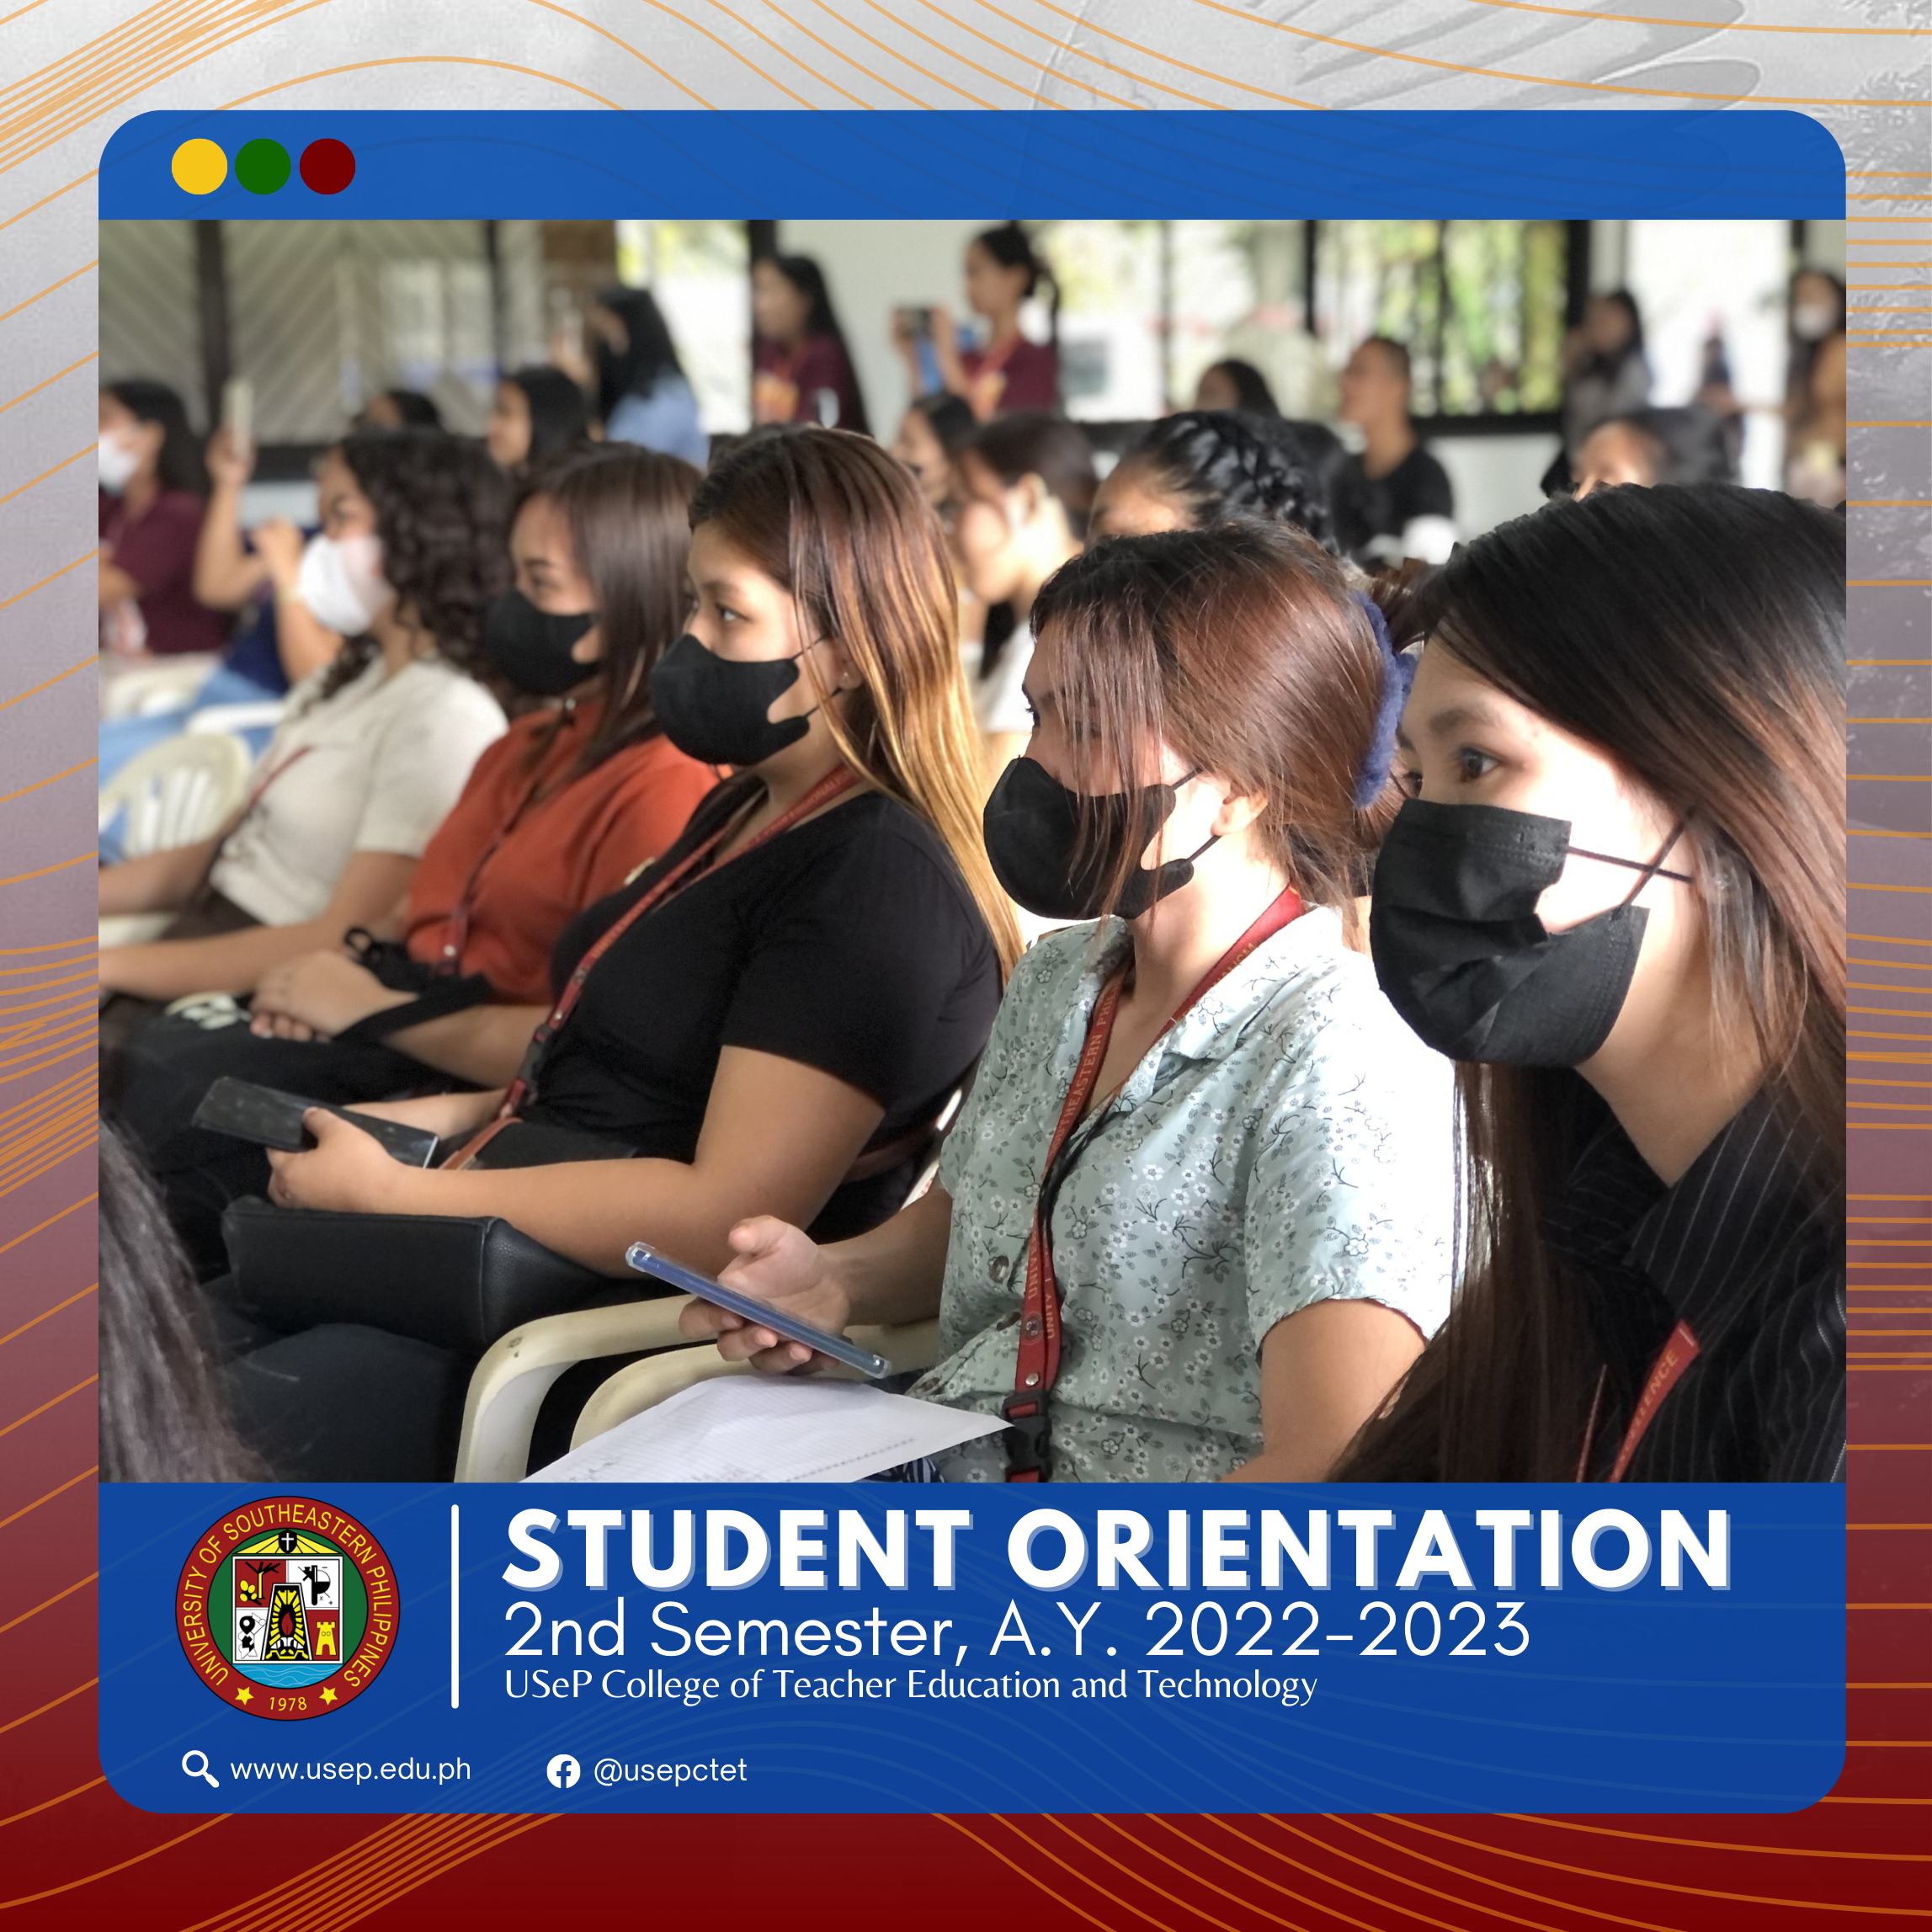 CTET conducts Student Orientation for 2nd Semester, A.Y. 2022-2023